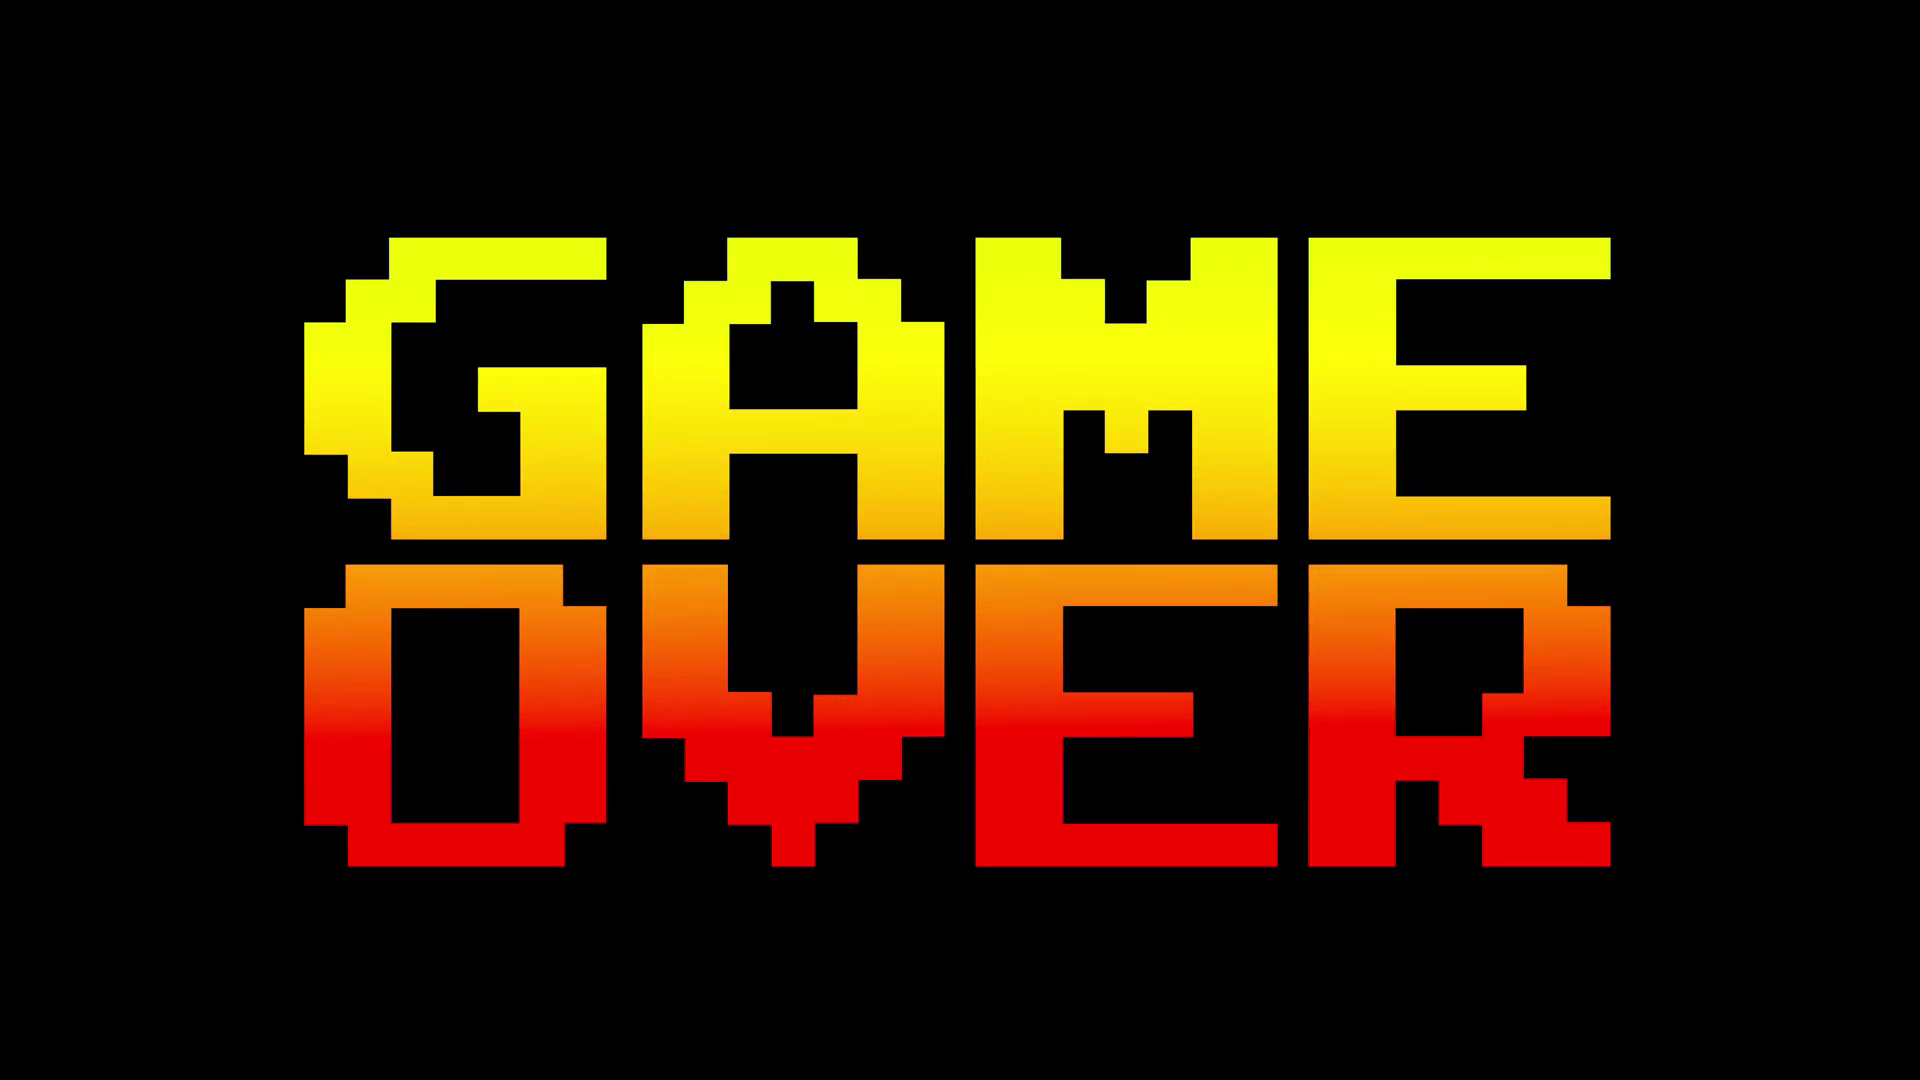 Videoblocks Game Over 8 Bit Funky A Funky Colorful 4k Game Over Screen